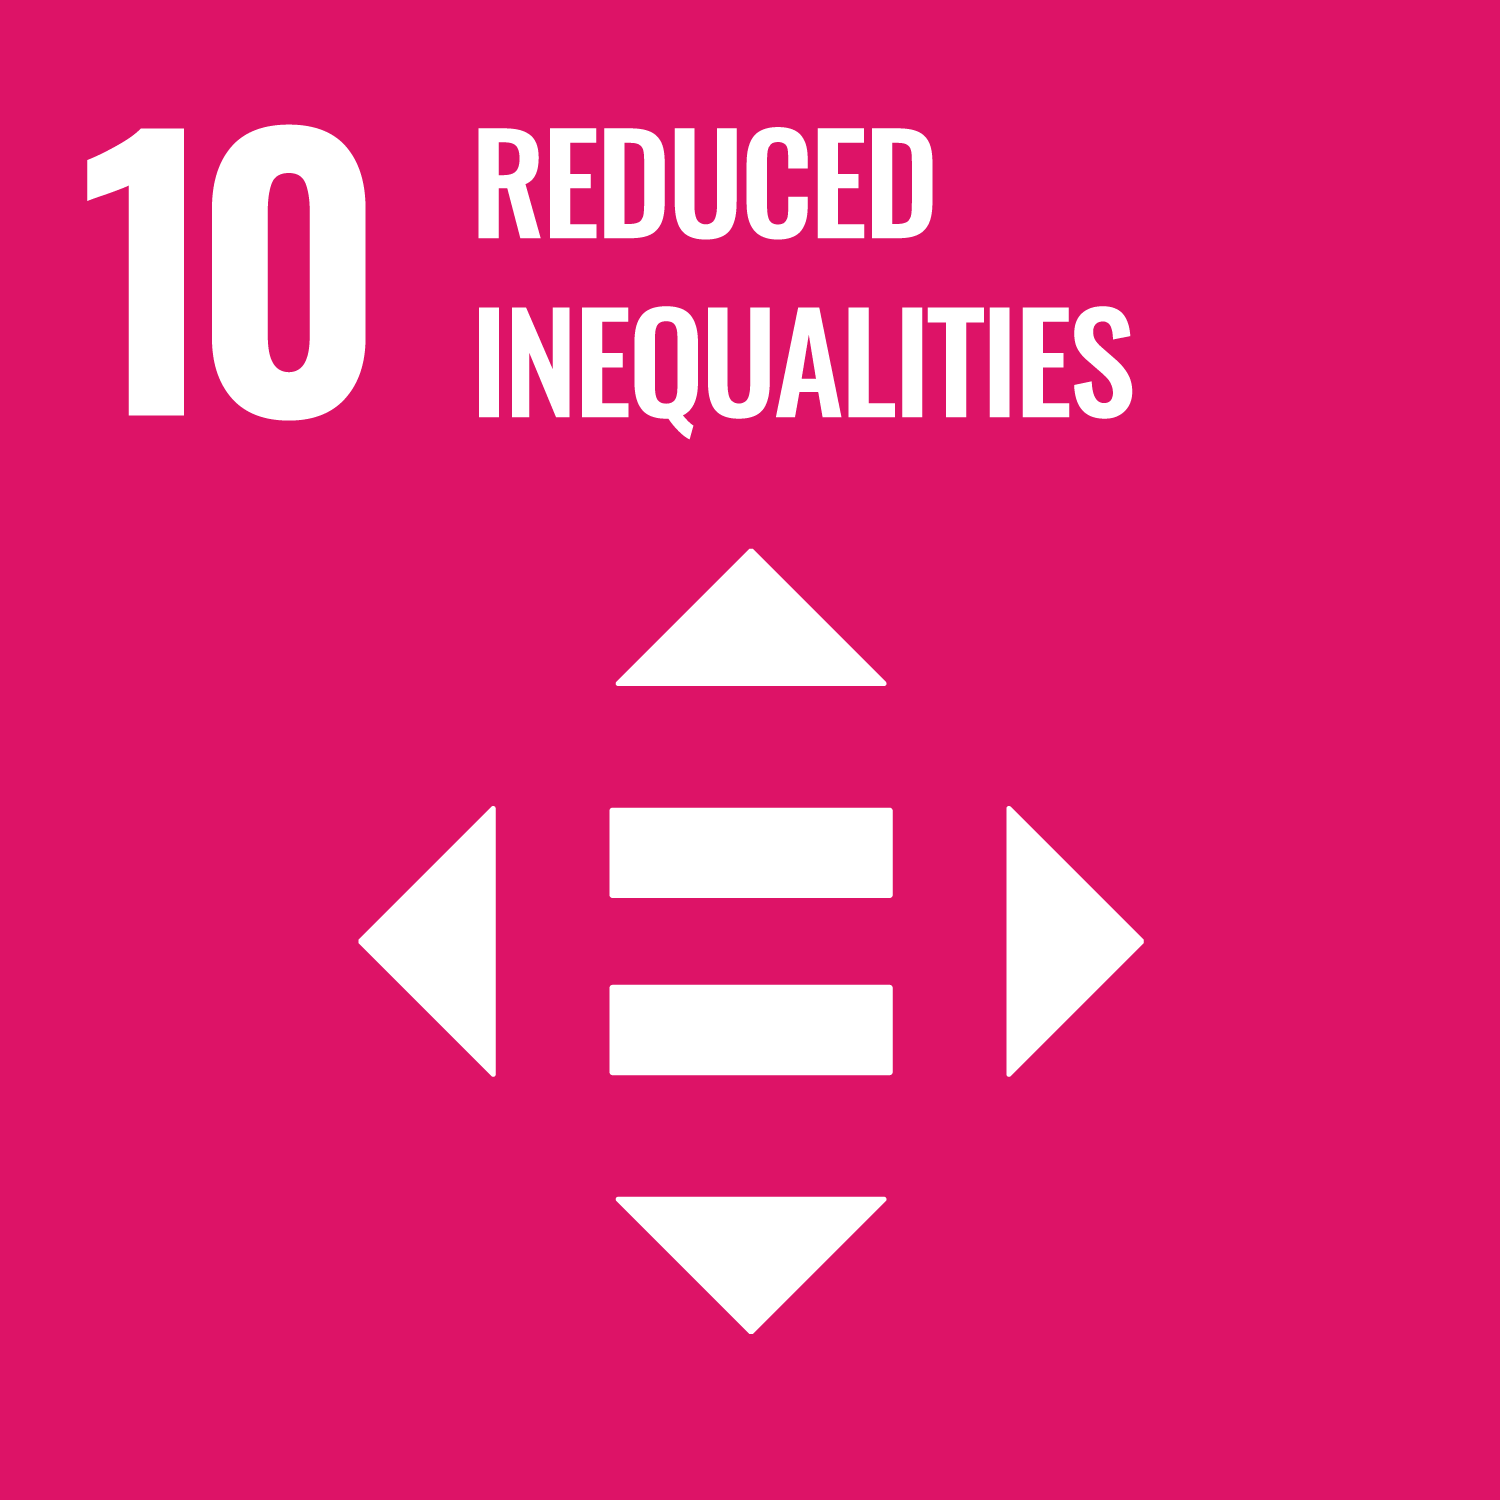 UN Compact Goal 10 Icon "Reduced Inequalities"